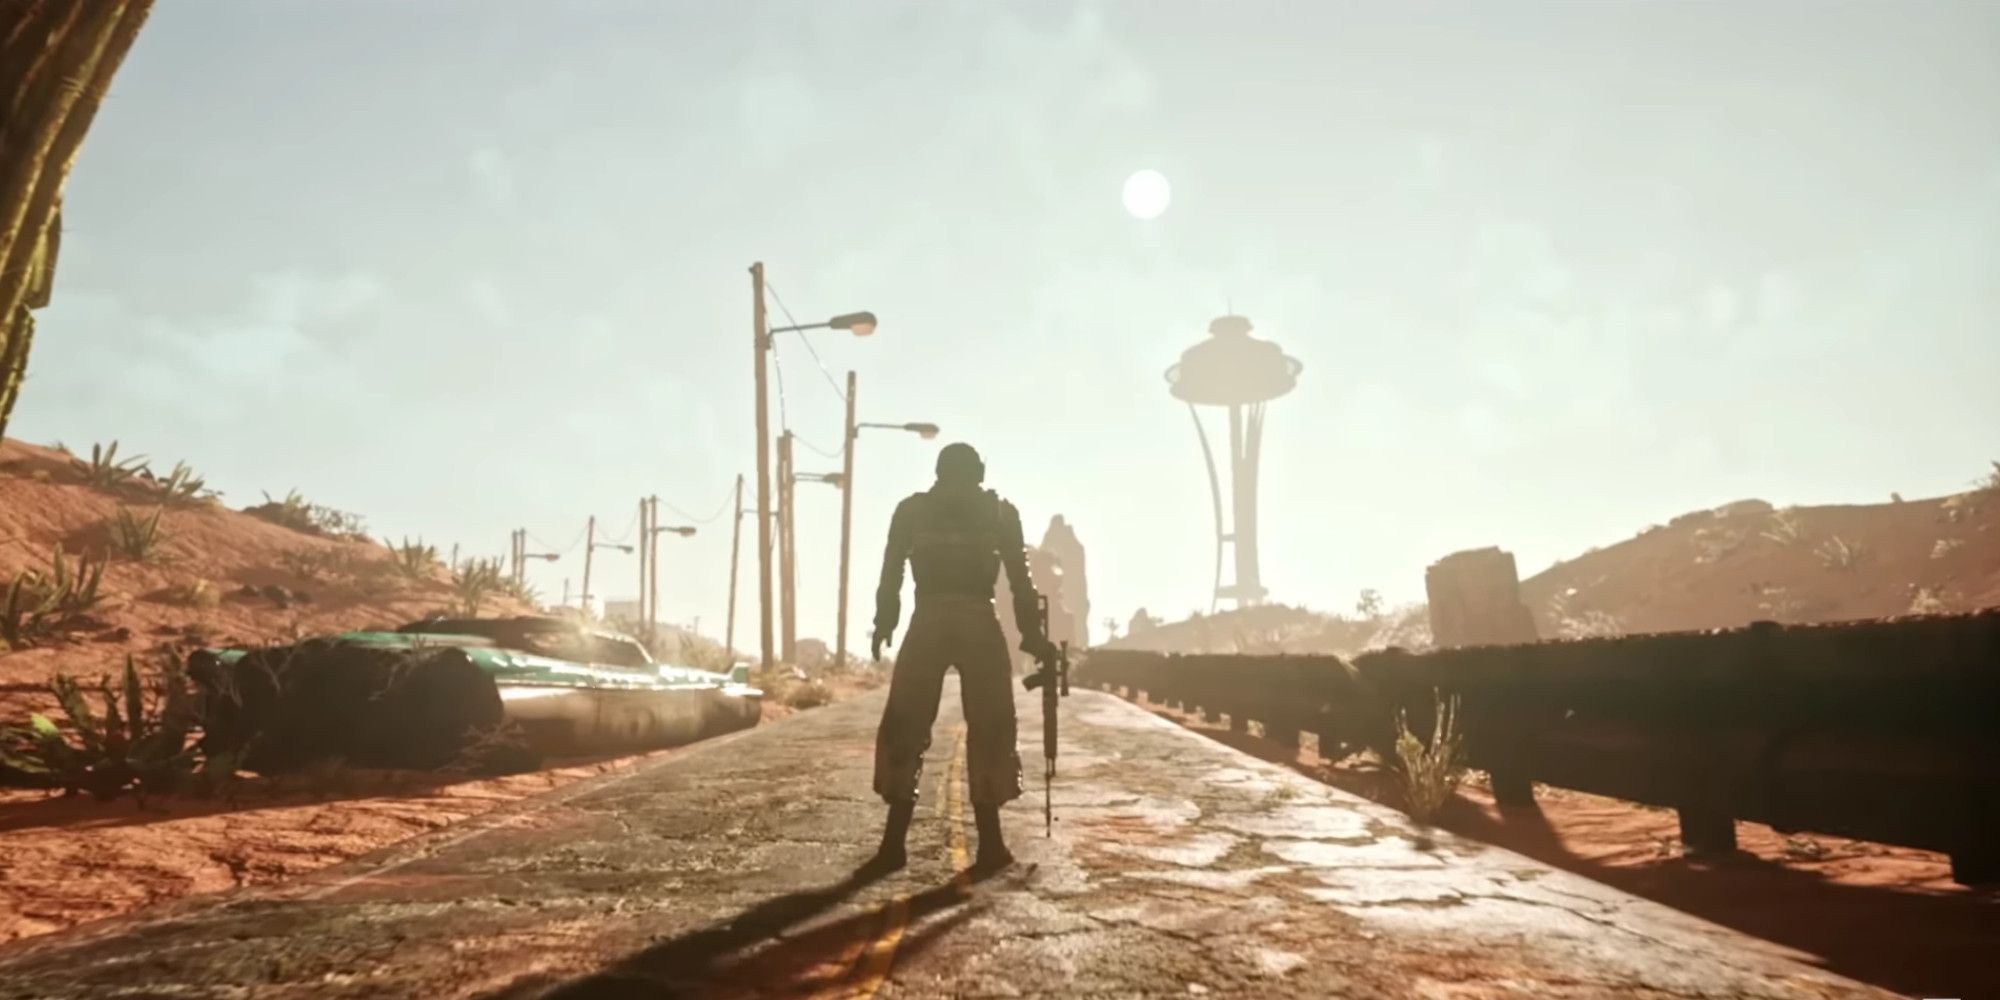 Fallout: New Vegas gets an Unreal Engine 5 remake in this fan-made trailer